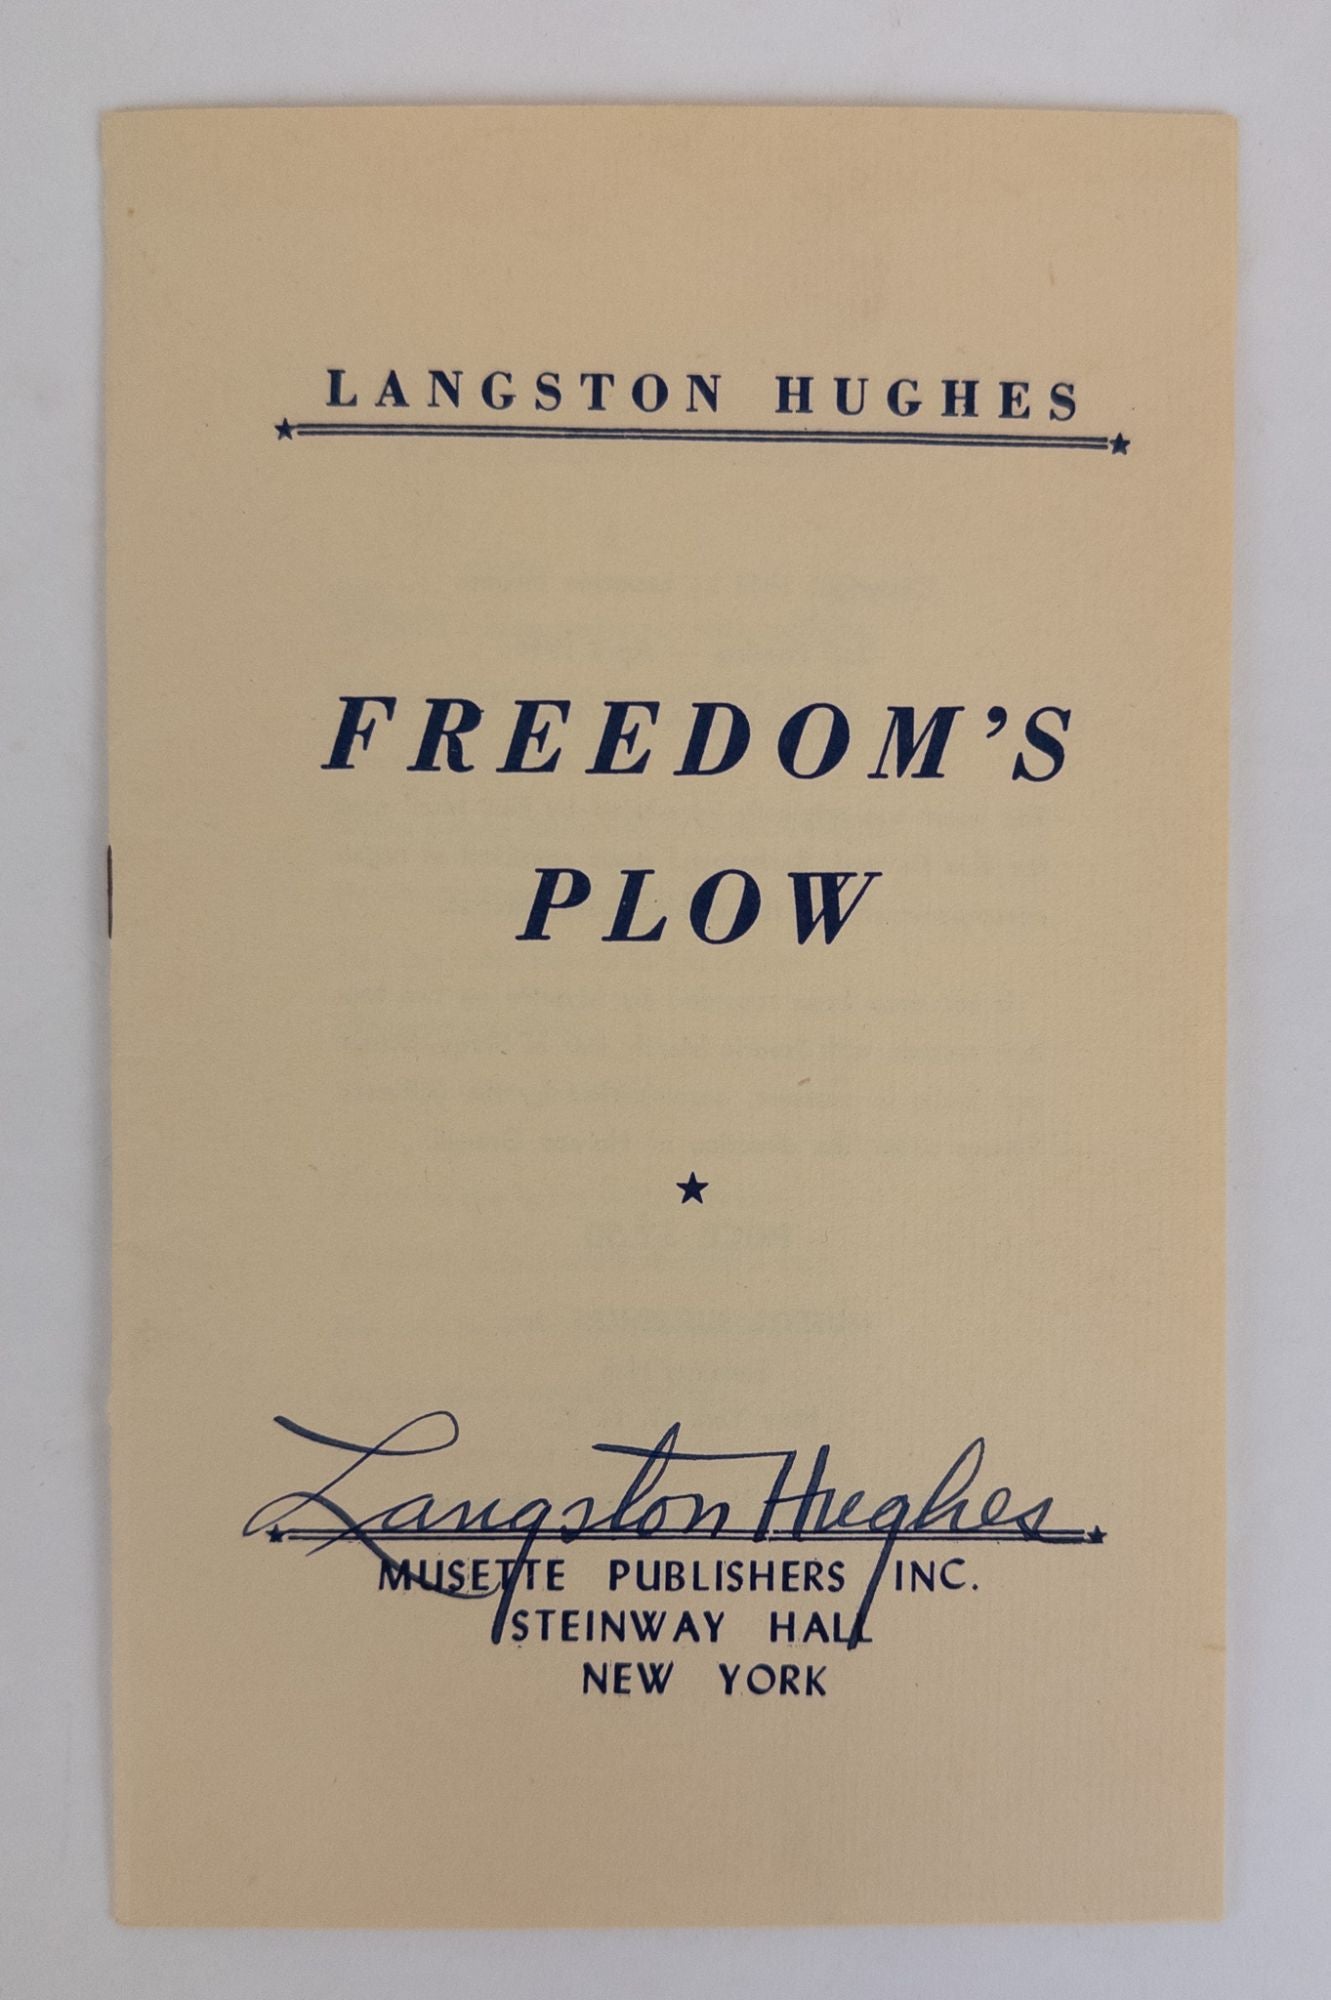 Product Image for FREEDOM'S PLOW [Signed]